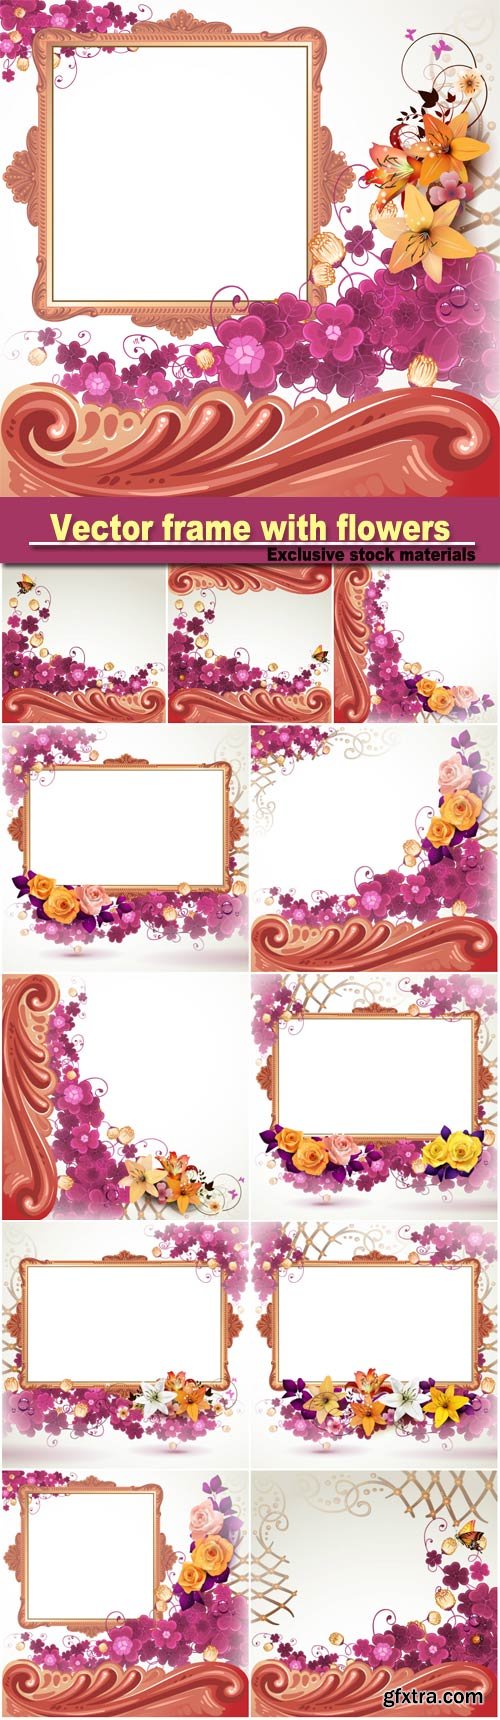 Vector frame with flowers, roses and lilies